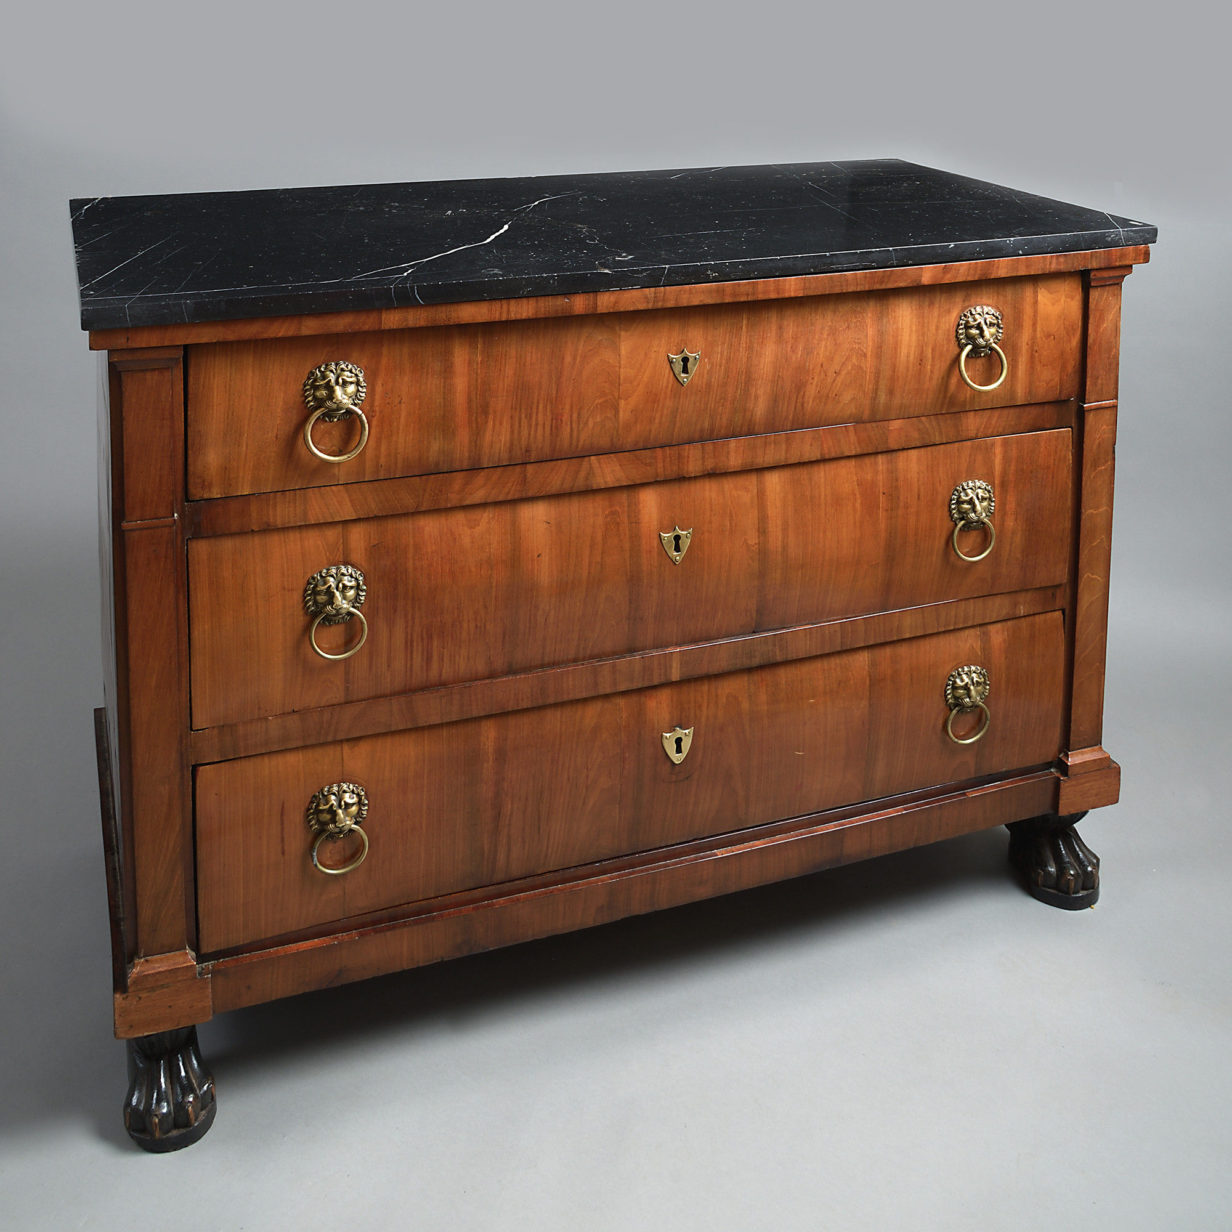 An early 19th century empire period walnut commode